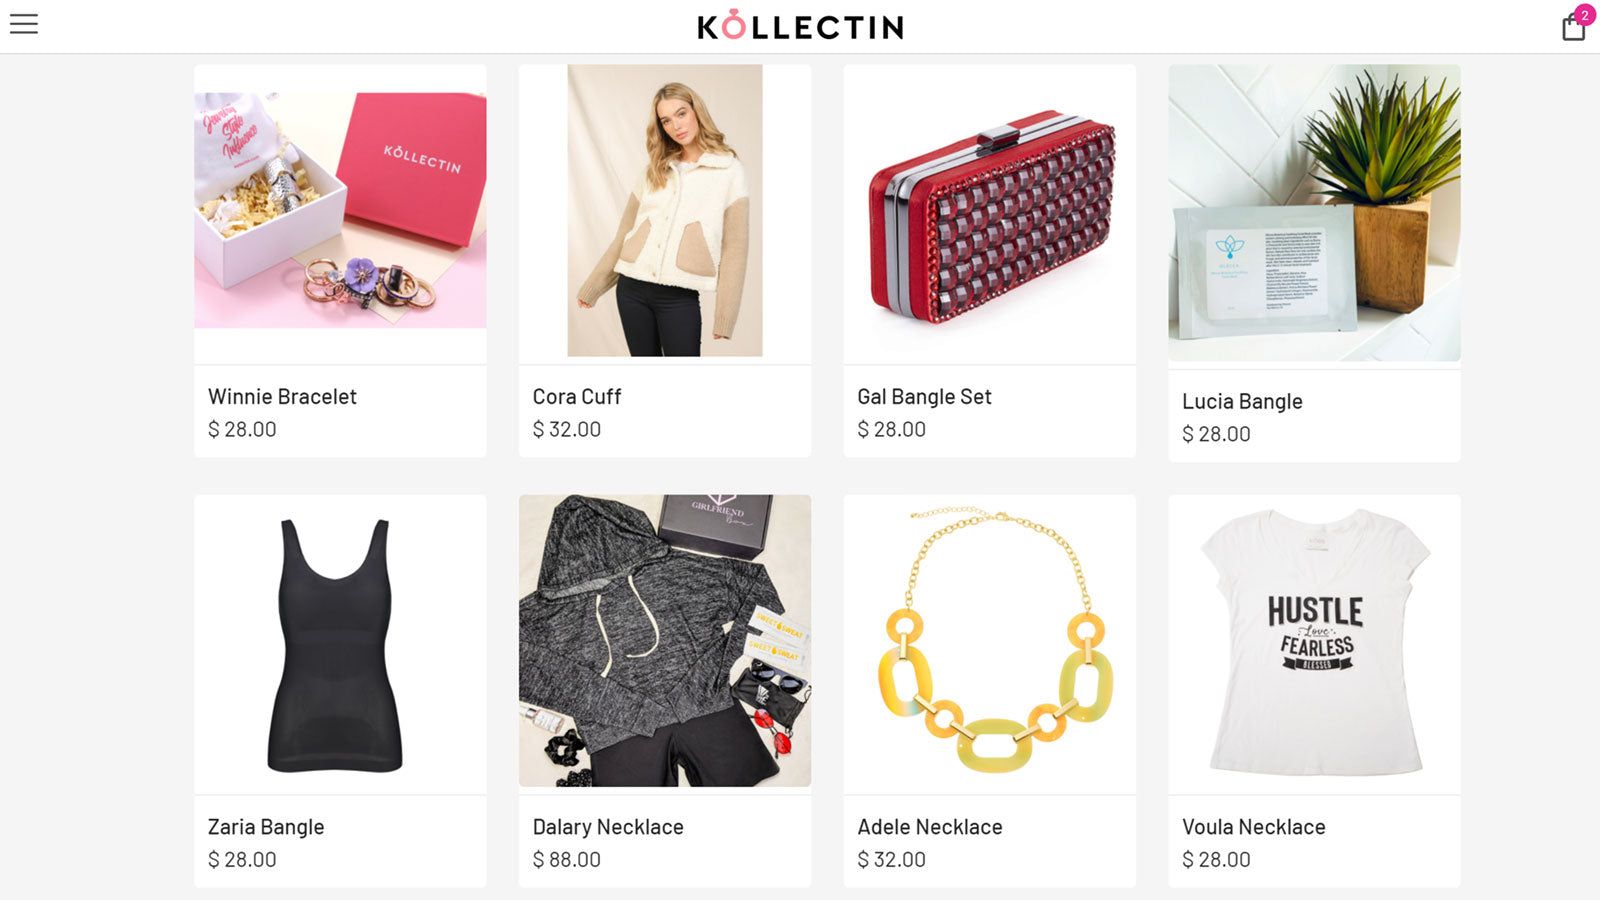 KOLLECTIN connects your brand with influencer online storefronts